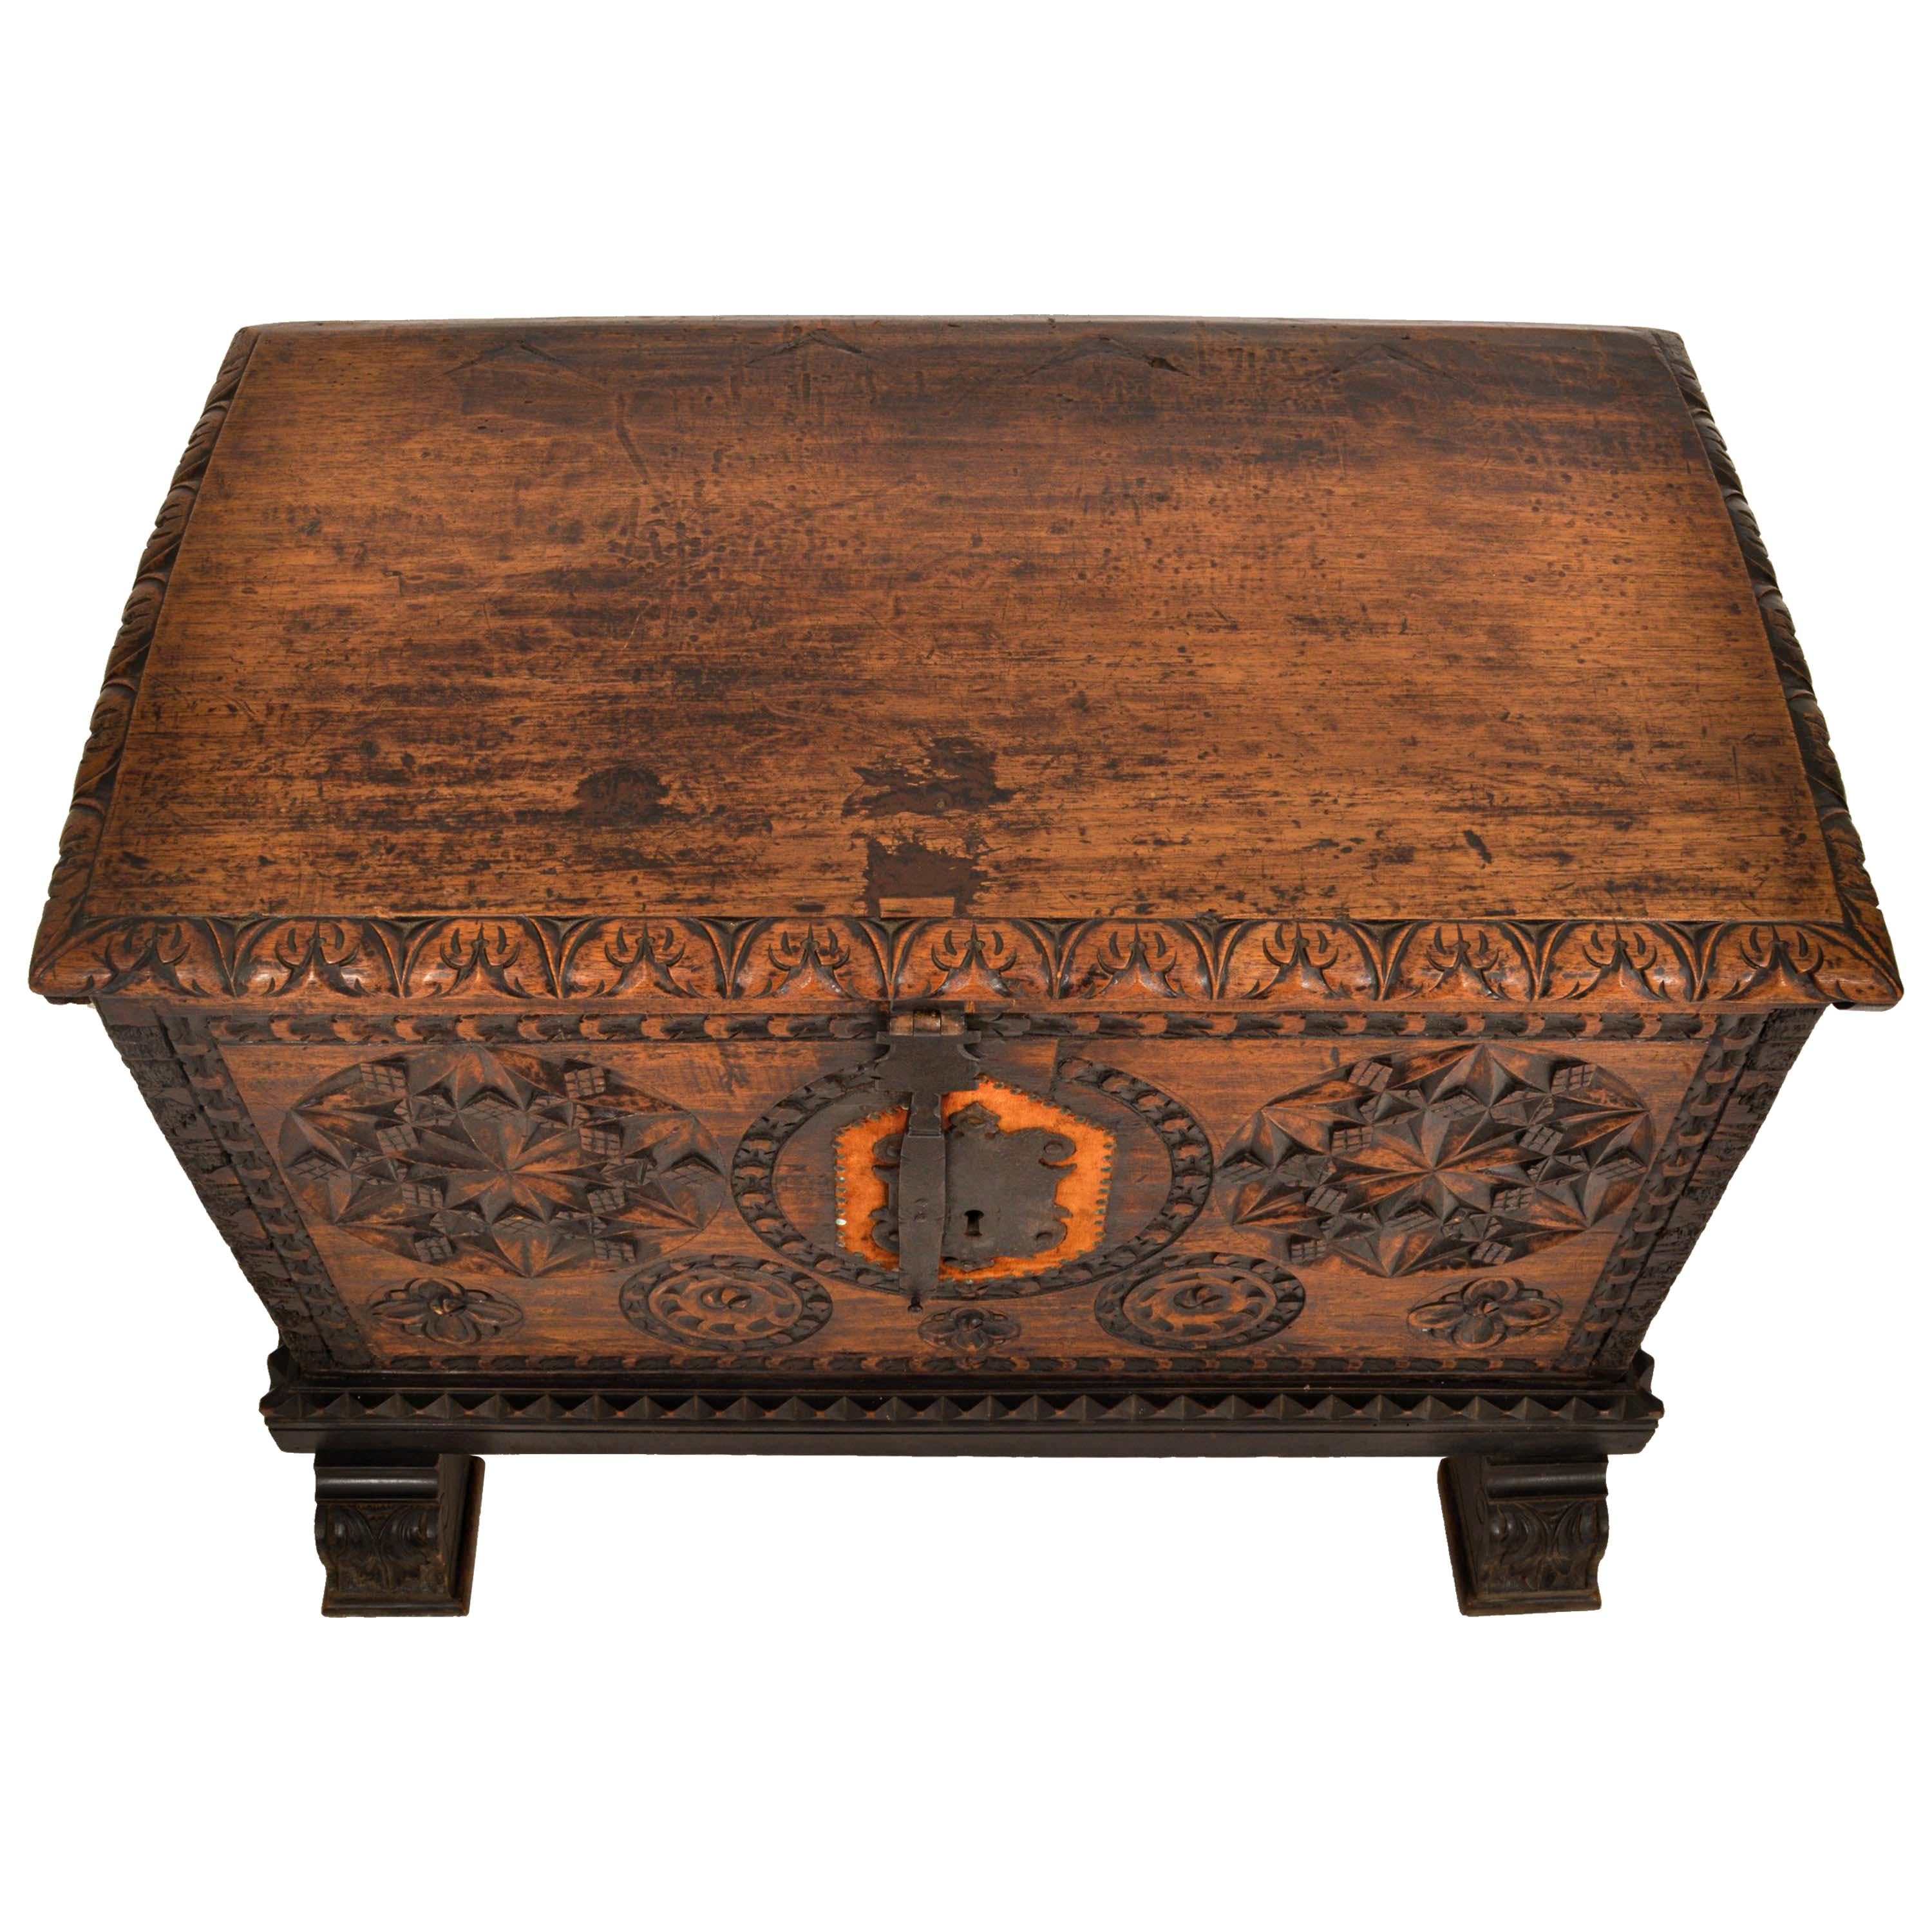 Antique Scandinavian Pine Baroque Folk Art Carved Dowry Chest Trunk Coffer 1780 For Sale 1